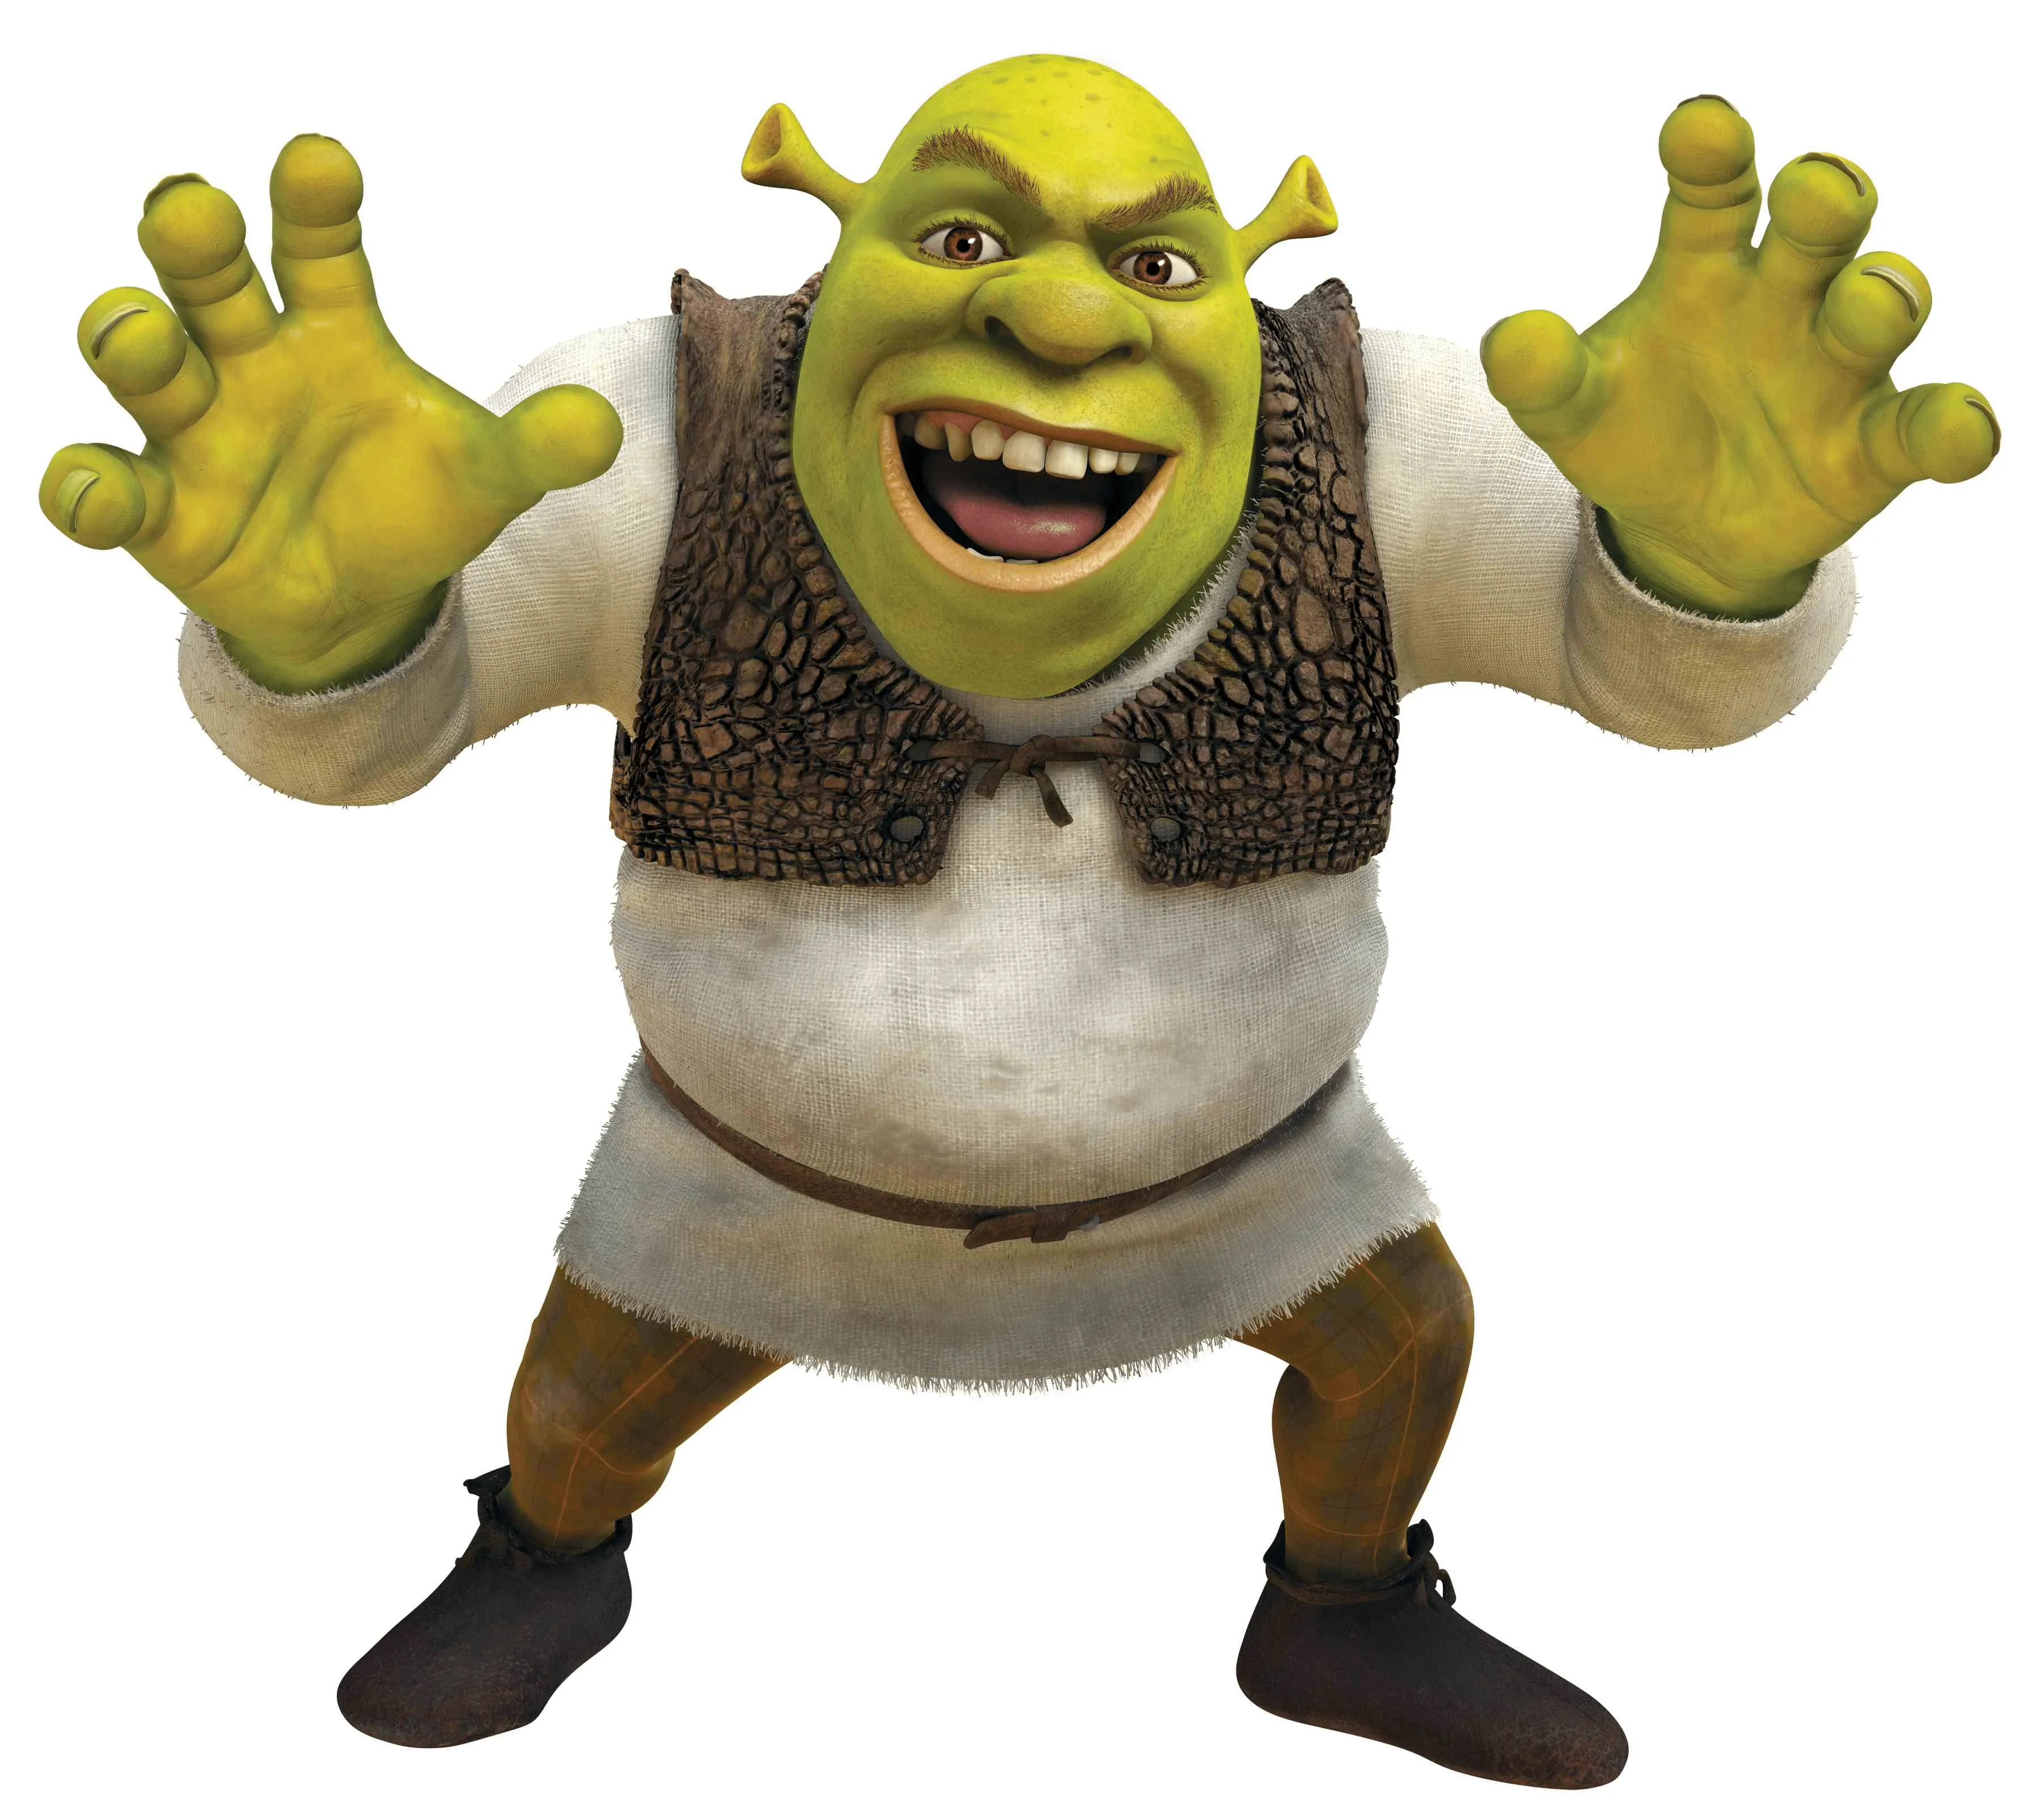  ... Shrek” and other animated hits. The contract would replace an